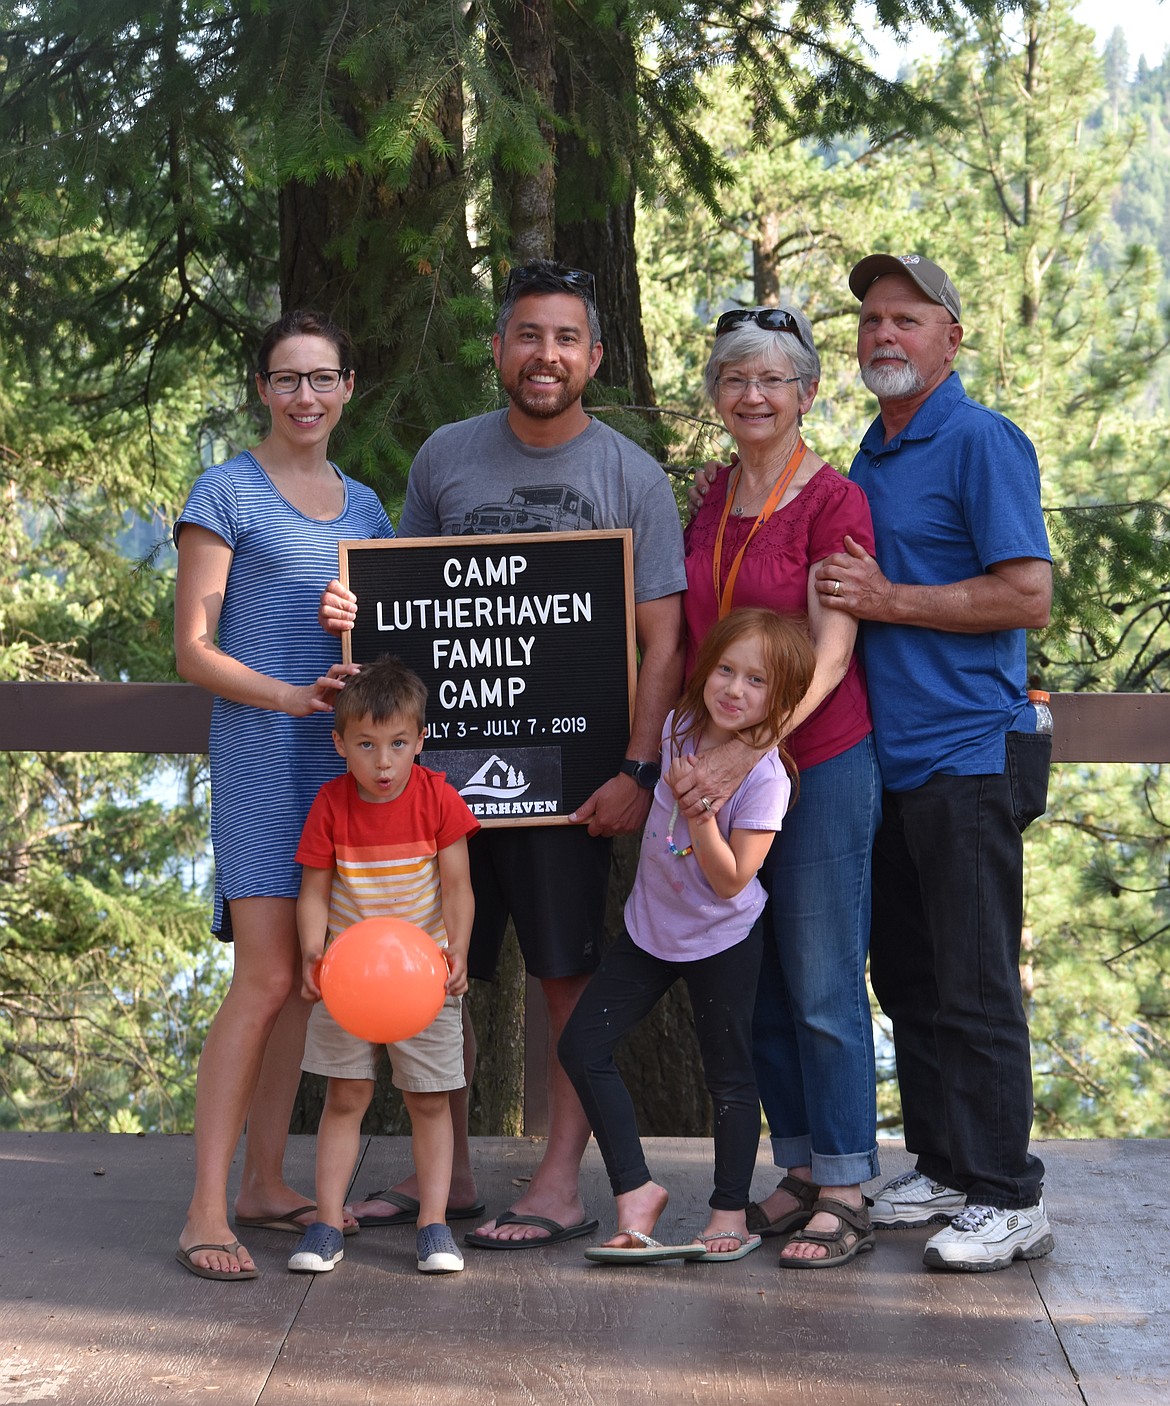 The Diaz family, which owns Our Town CDA Real Estate, has presented a challenge to help Camp Lutherhaven shine in this year-end season of giving. Gifts received through today will be matched by the Diaz family up to $25,000 to provide a $50,000 year-end boost as Lutherhaven plans to open for traditional summer kids camp in 2021. From left, back row: Eren and Raniel Diaz, Cindy and Dan Henders. Front row, from left: Weston and Quinley Diaz.